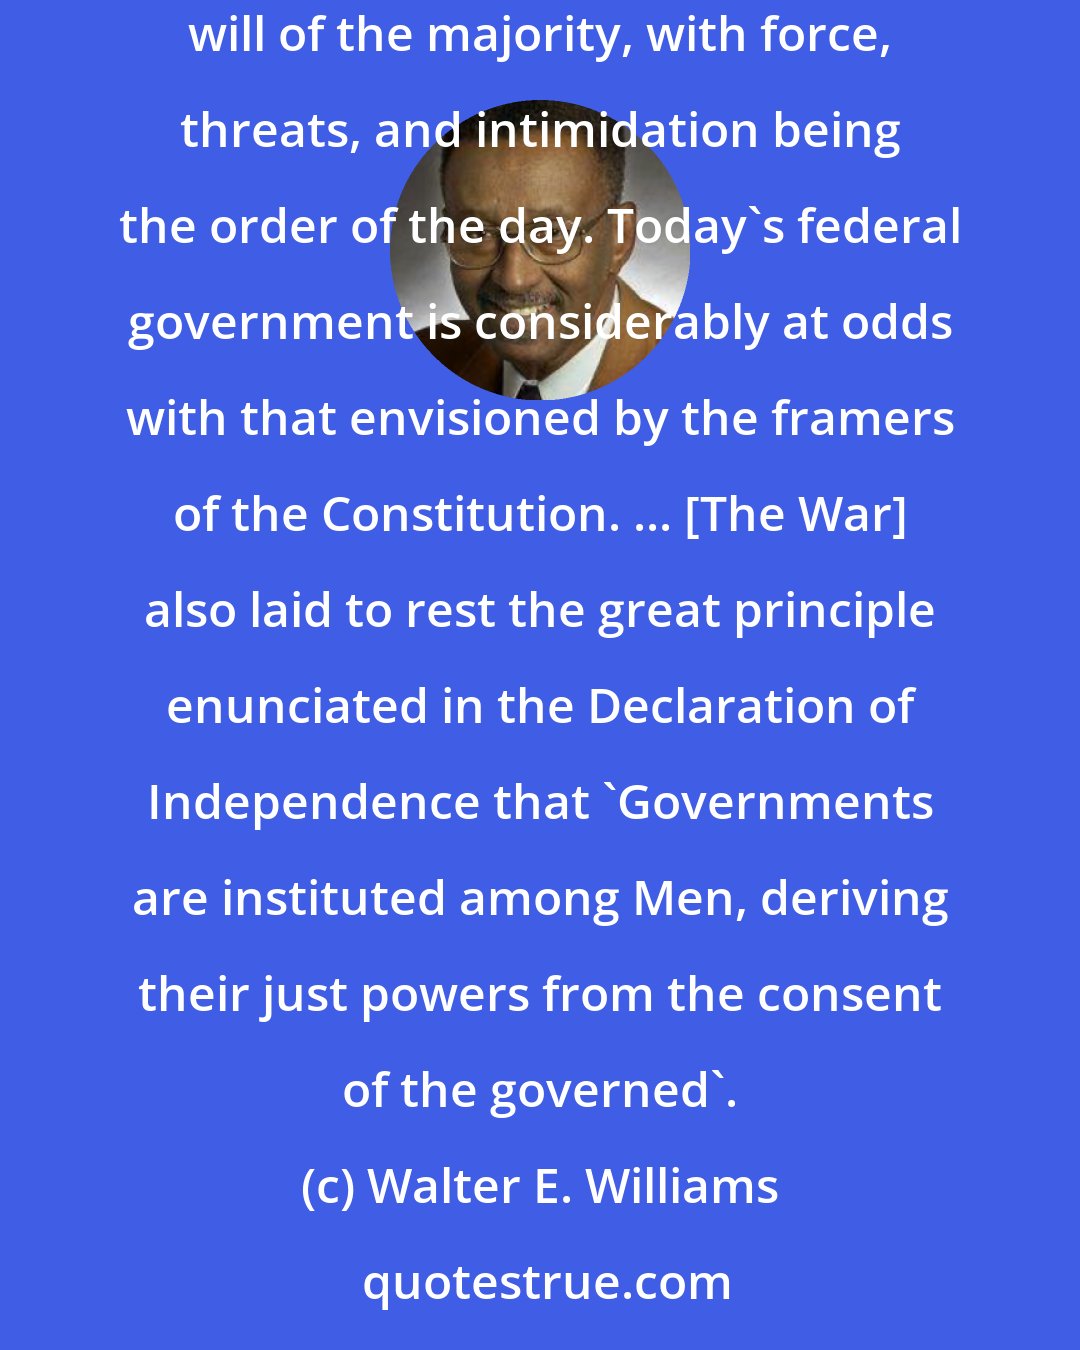 Walter E. Williams: The War between the States... produced the foundation for the kind of government we have today: consolidated and absolute, based on the unrestrained will of the majority, with force, threats, and intimidation being the order of the day. Today's federal government is considerably at odds with that envisioned by the framers of the Constitution. ... [The War] also laid to rest the great principle enunciated in the Declaration of Independence that 'Governments are instituted among Men, deriving their just powers from the consent of the governed'.